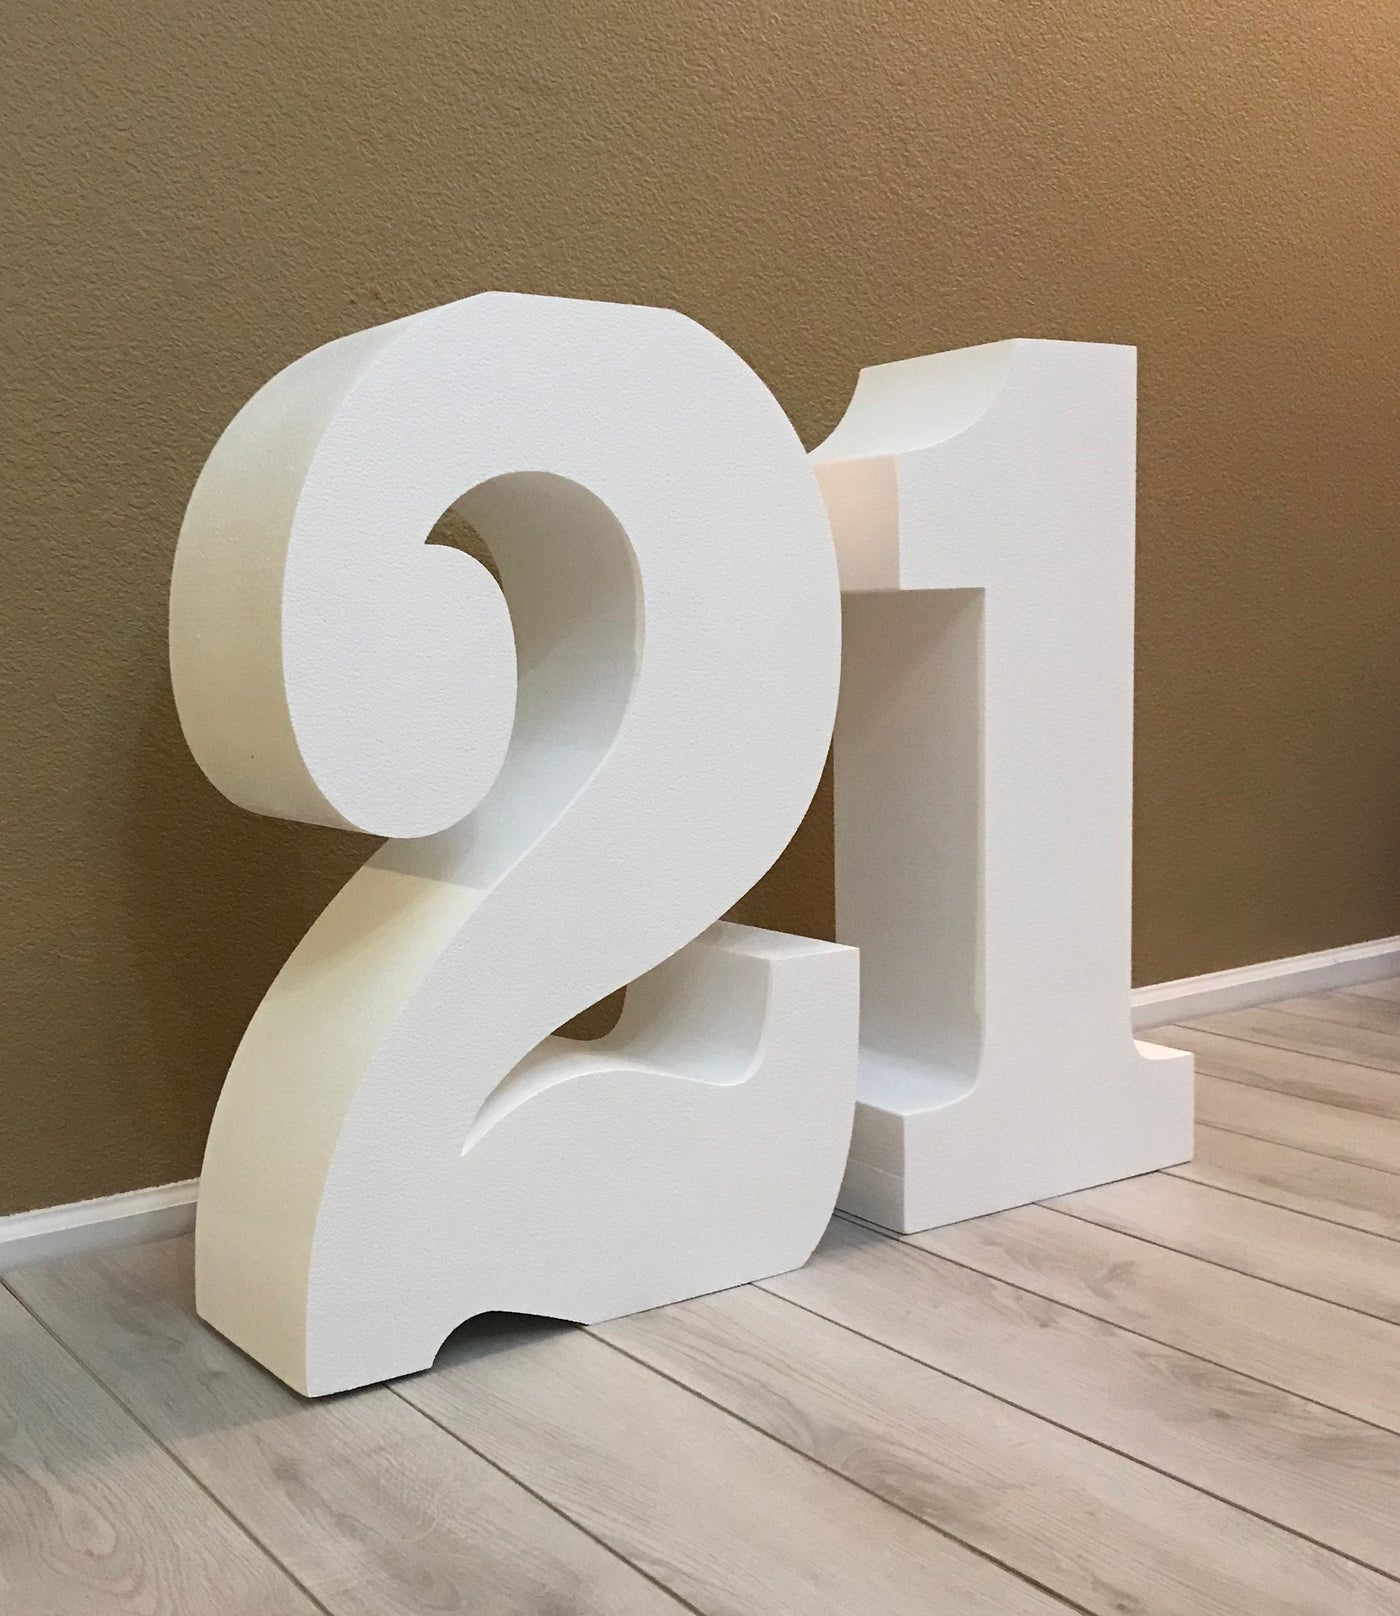 ANY two numbers 30" tall and 8" deep Table Base Foam letters